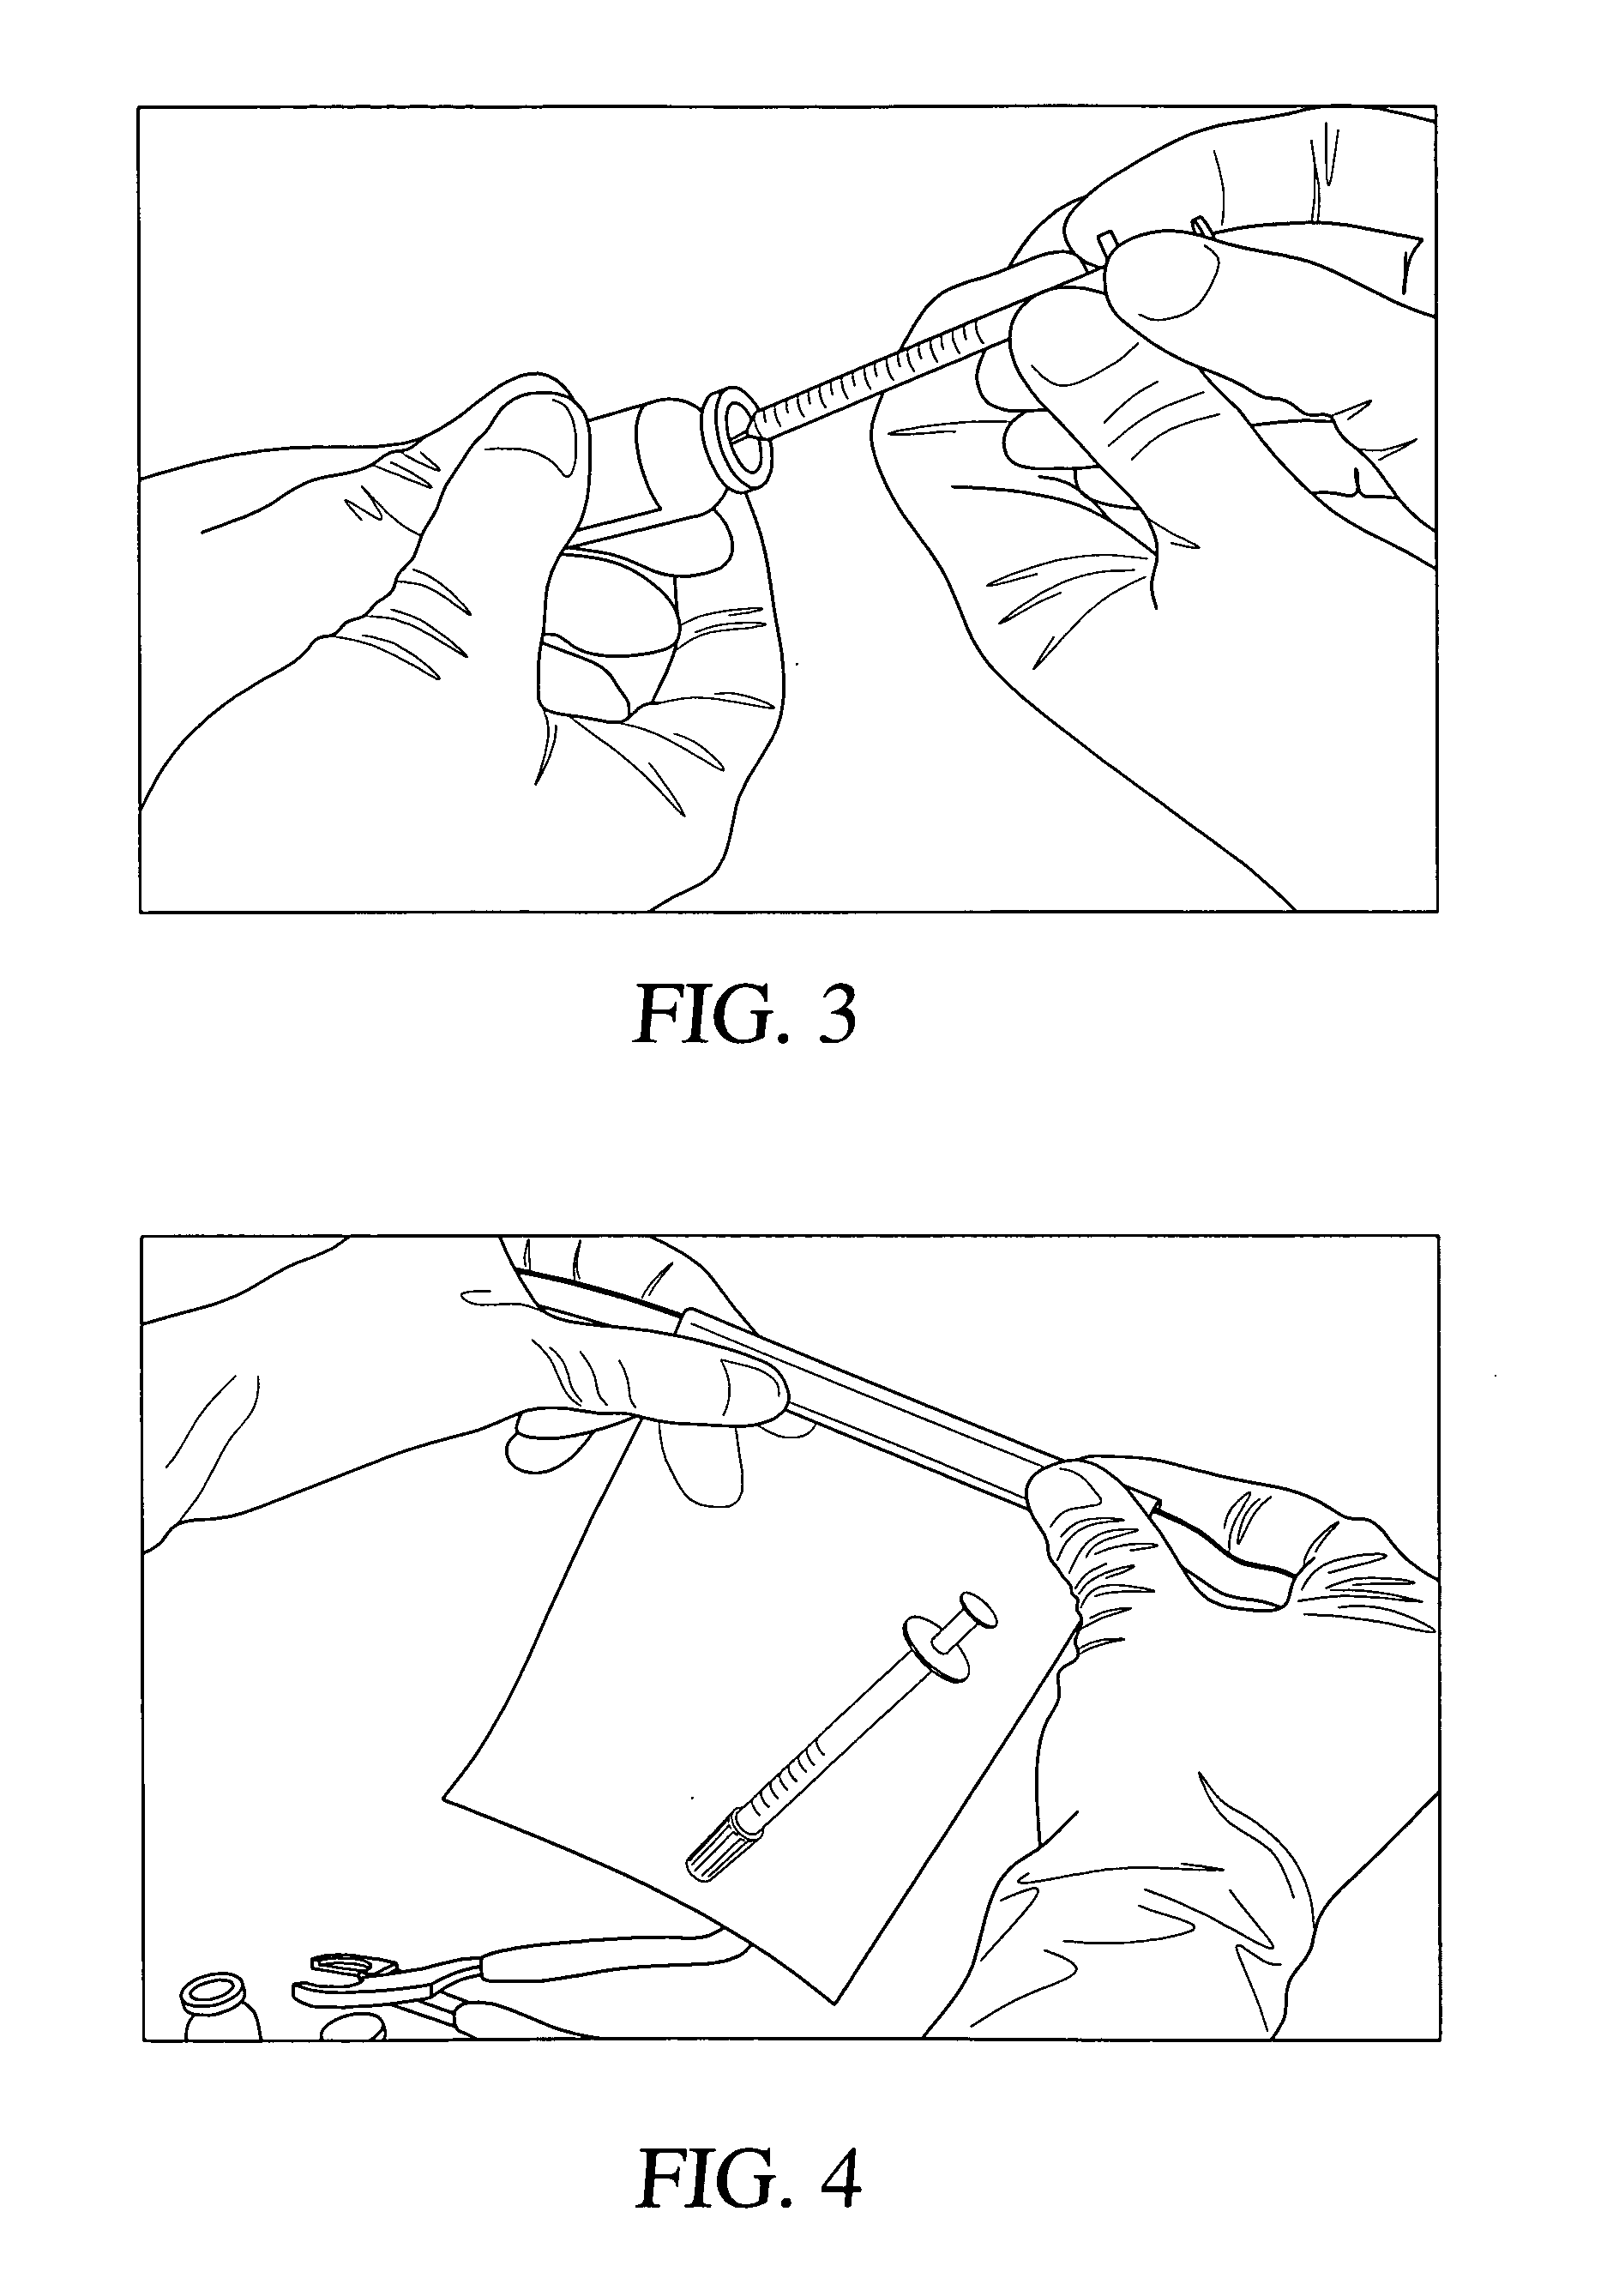 Method of preparing multiple doses of a pharmaceutical solution from a single-dose